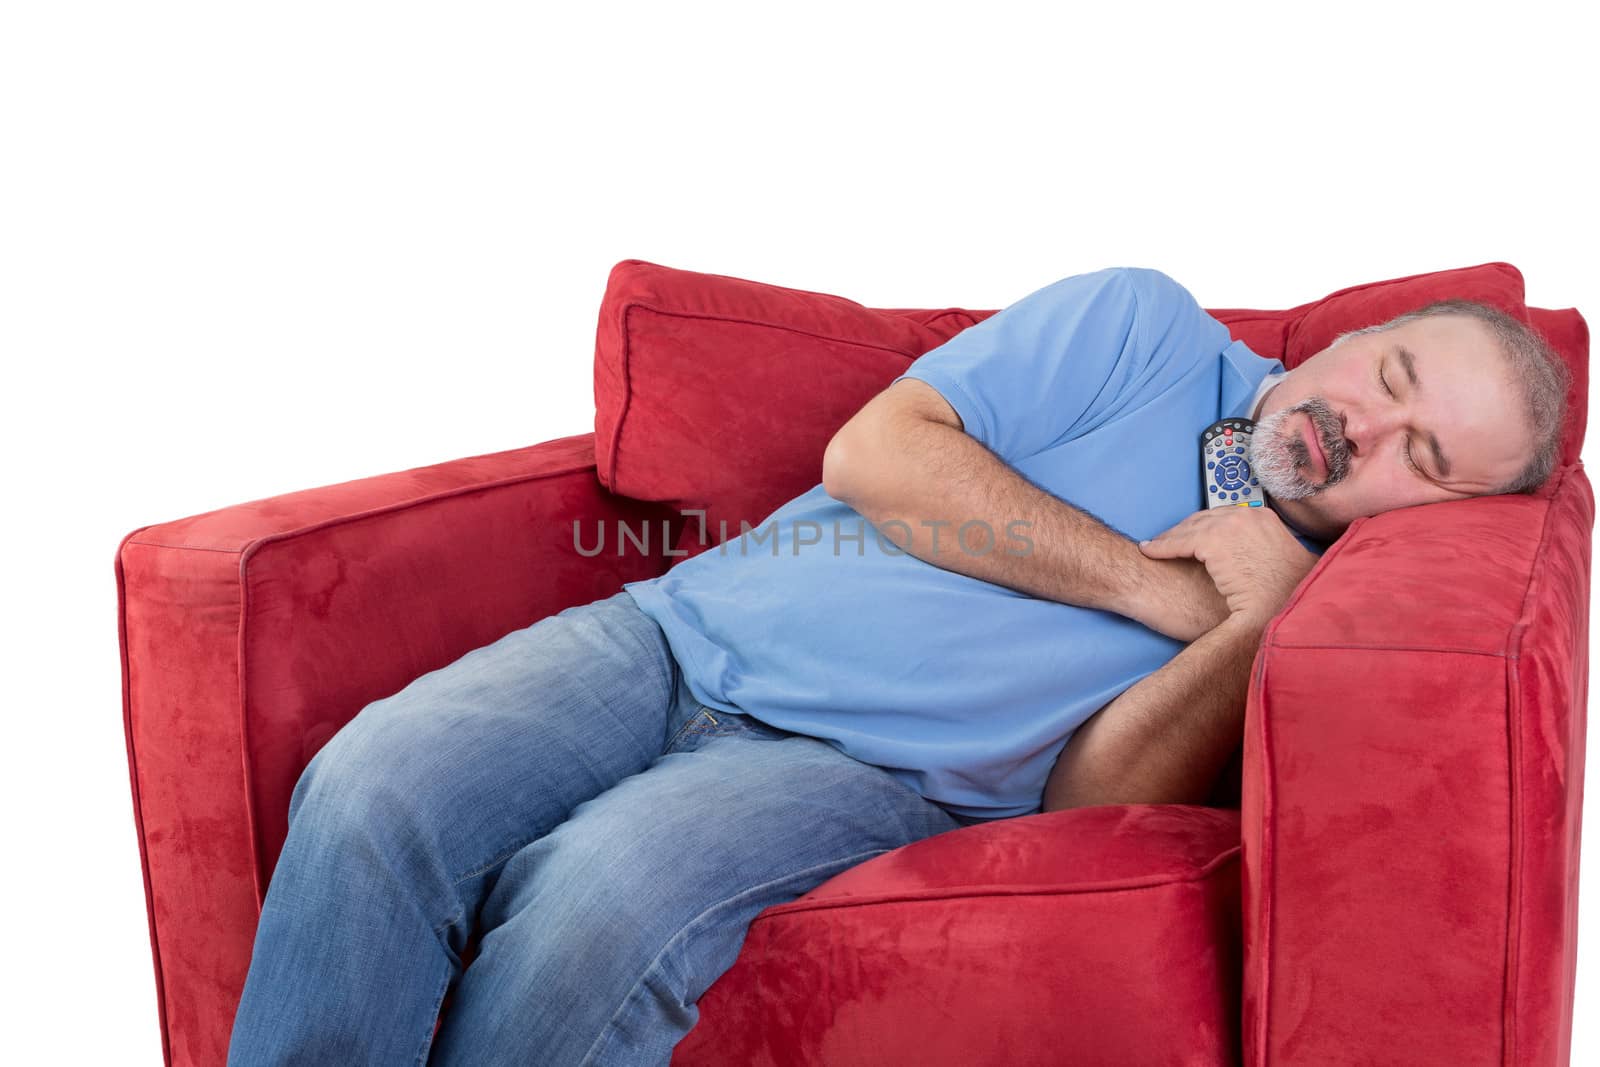 Tired middle-aged man fallen asleep while watching television with the remote control in his hand and his head resting on the arm of a comfortable red chair, isolated on white